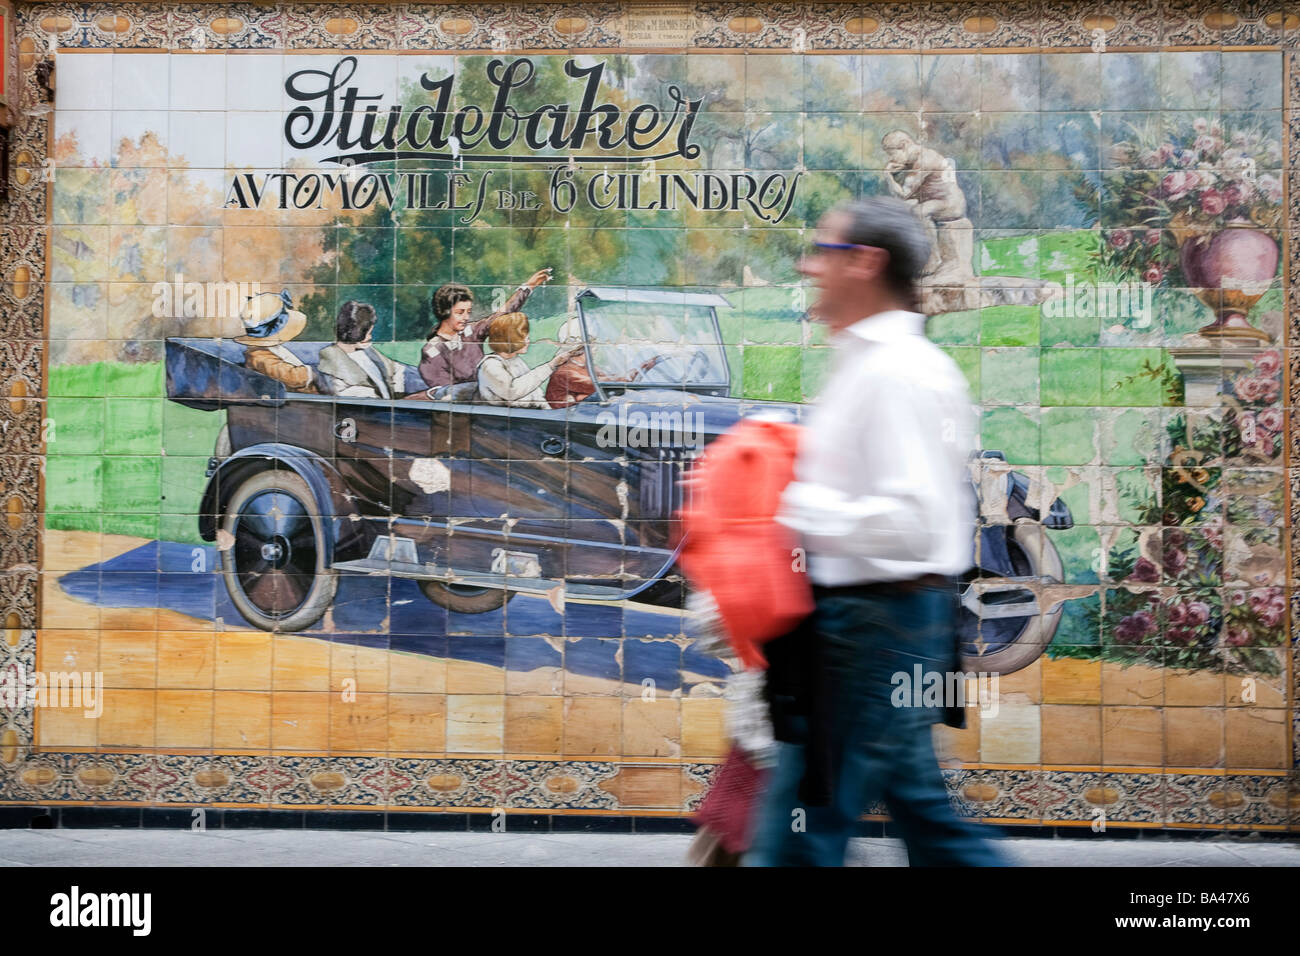 Mosaic made with glazed ceramic in a vintage advertisement of Studebaker motor company town of Seville autonomous community of Stock Photo